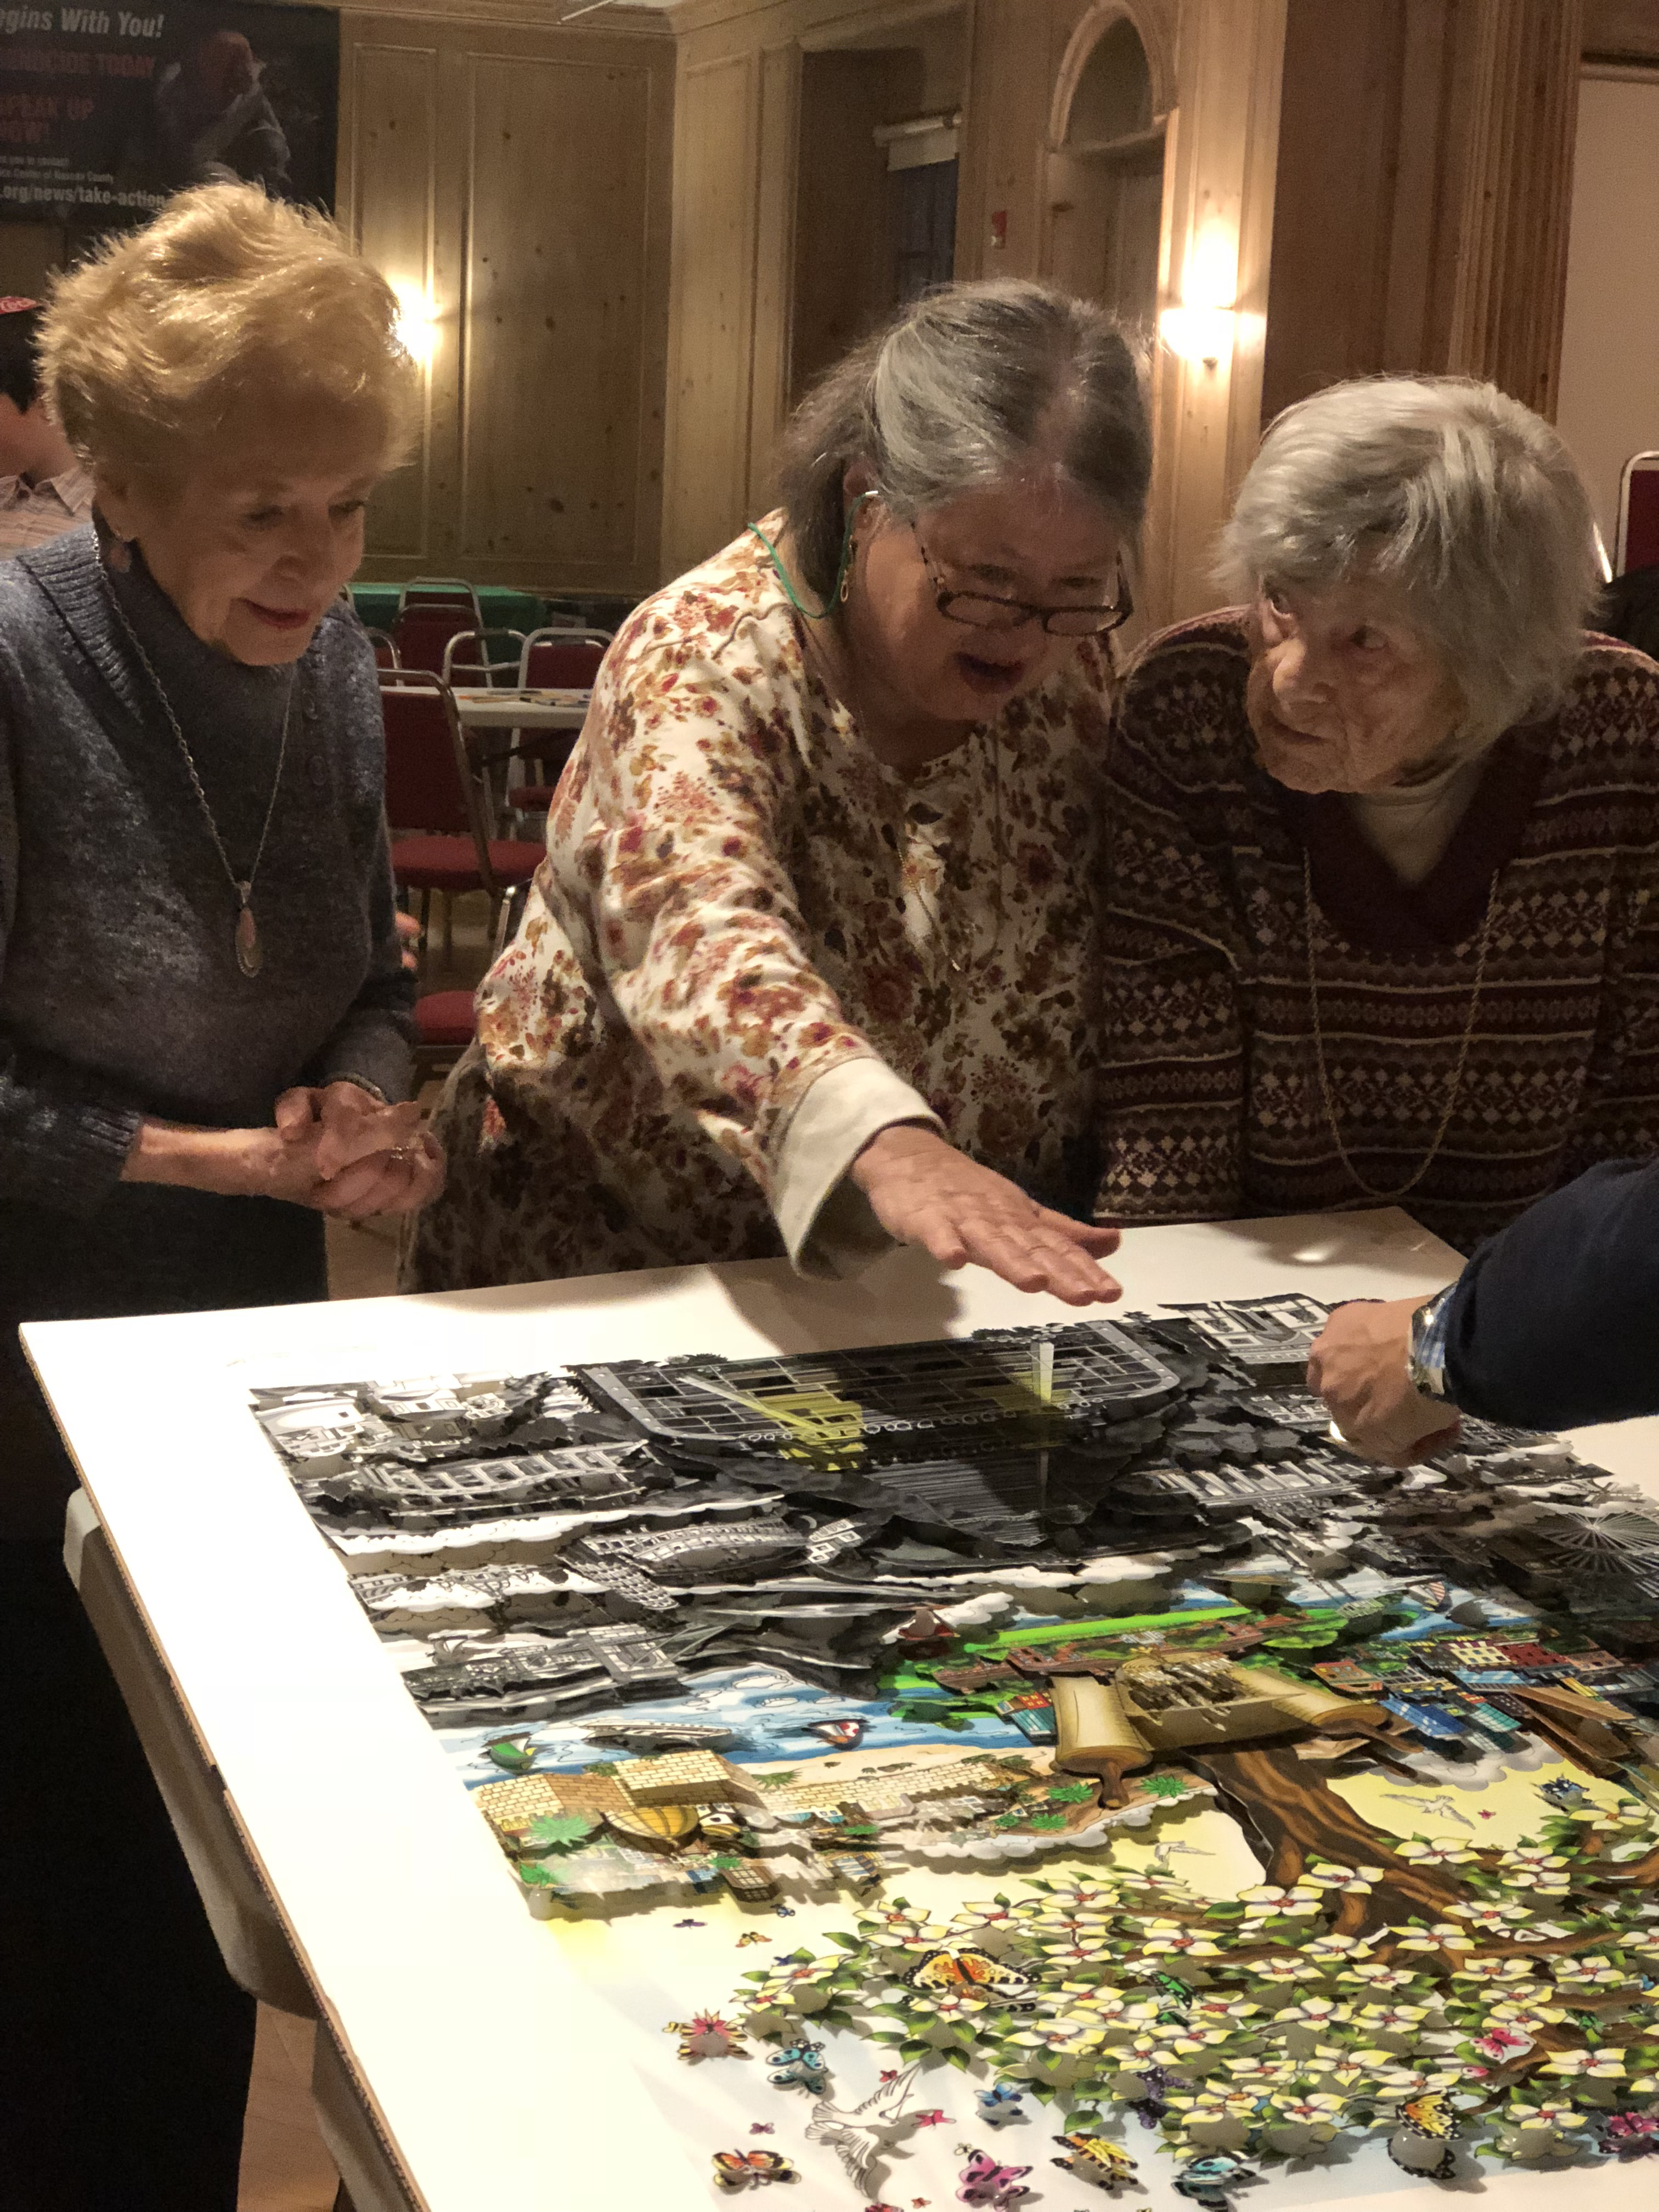 Anita Weisbord, Ethel and Felice Katz work on recreating "After the Darkness" 3d pop art piece by Charles Fazzino